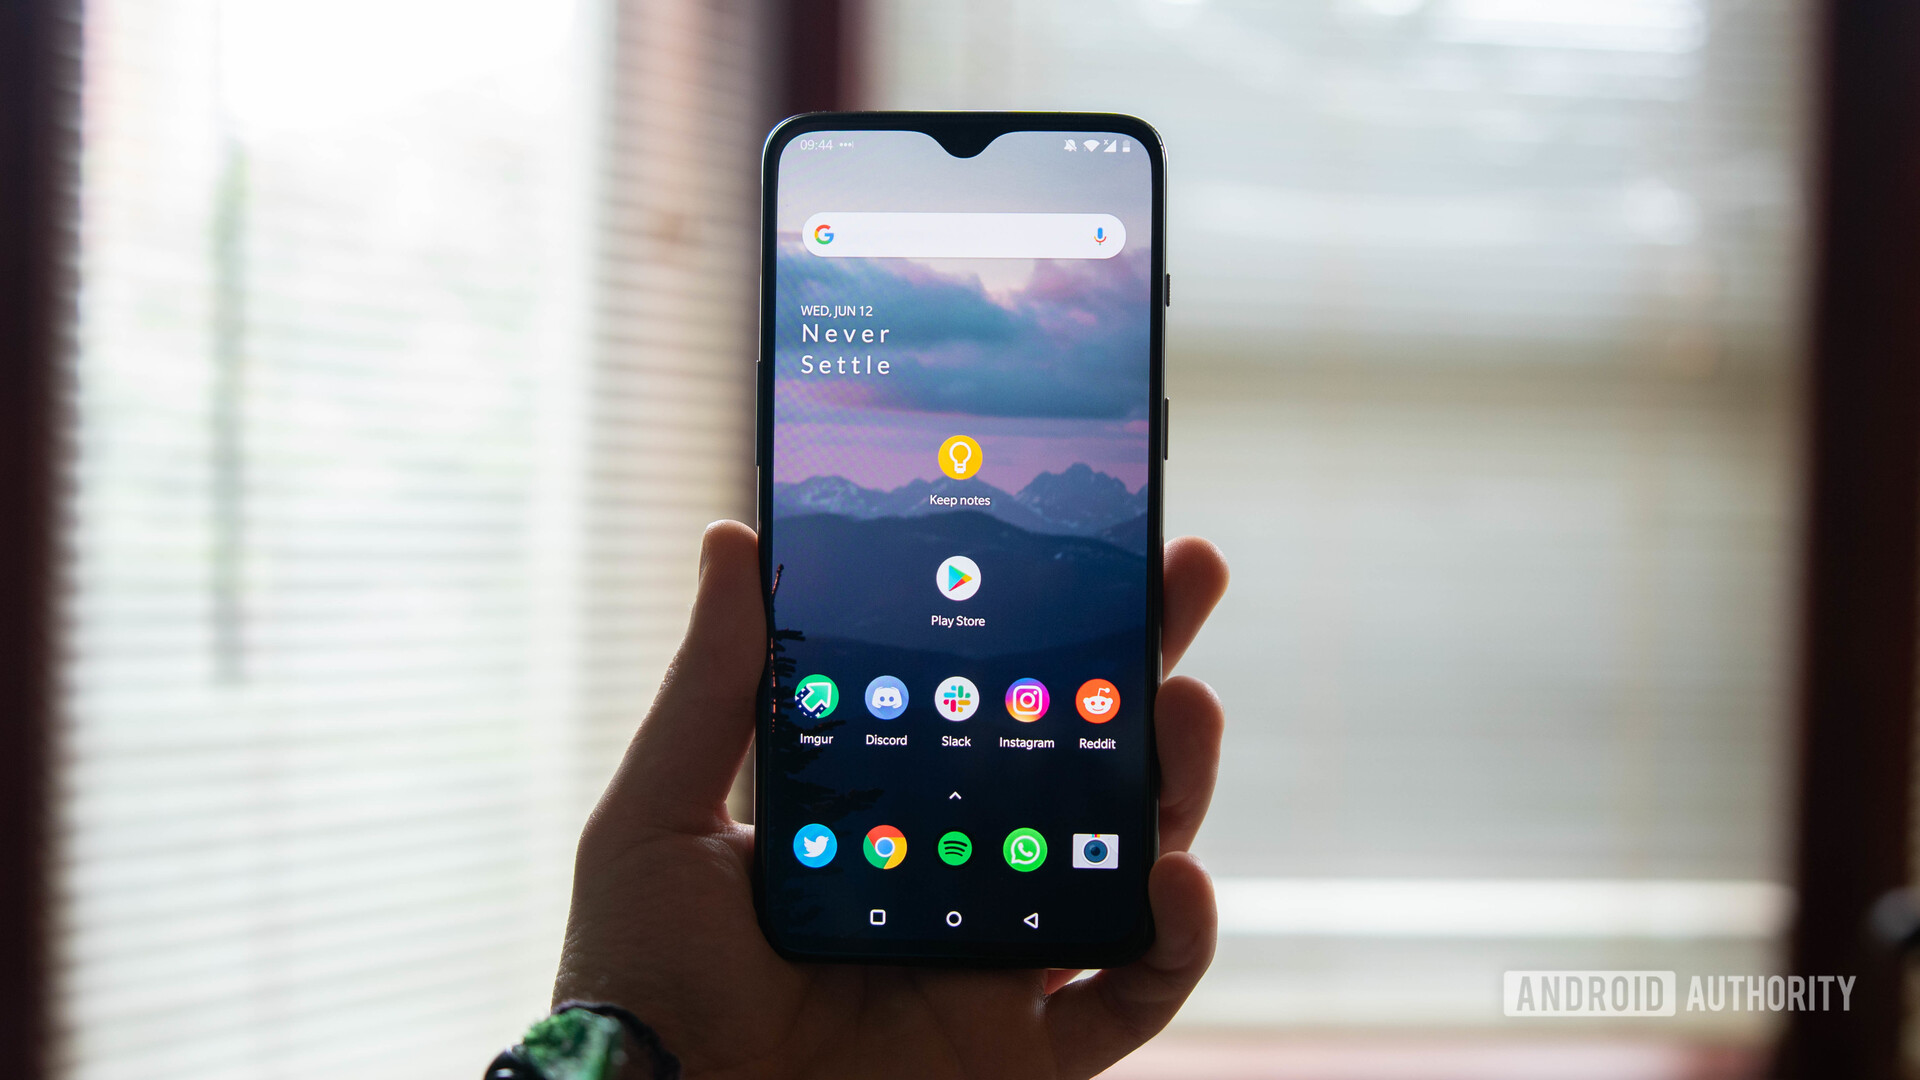 OnePlus 7 display with home screen